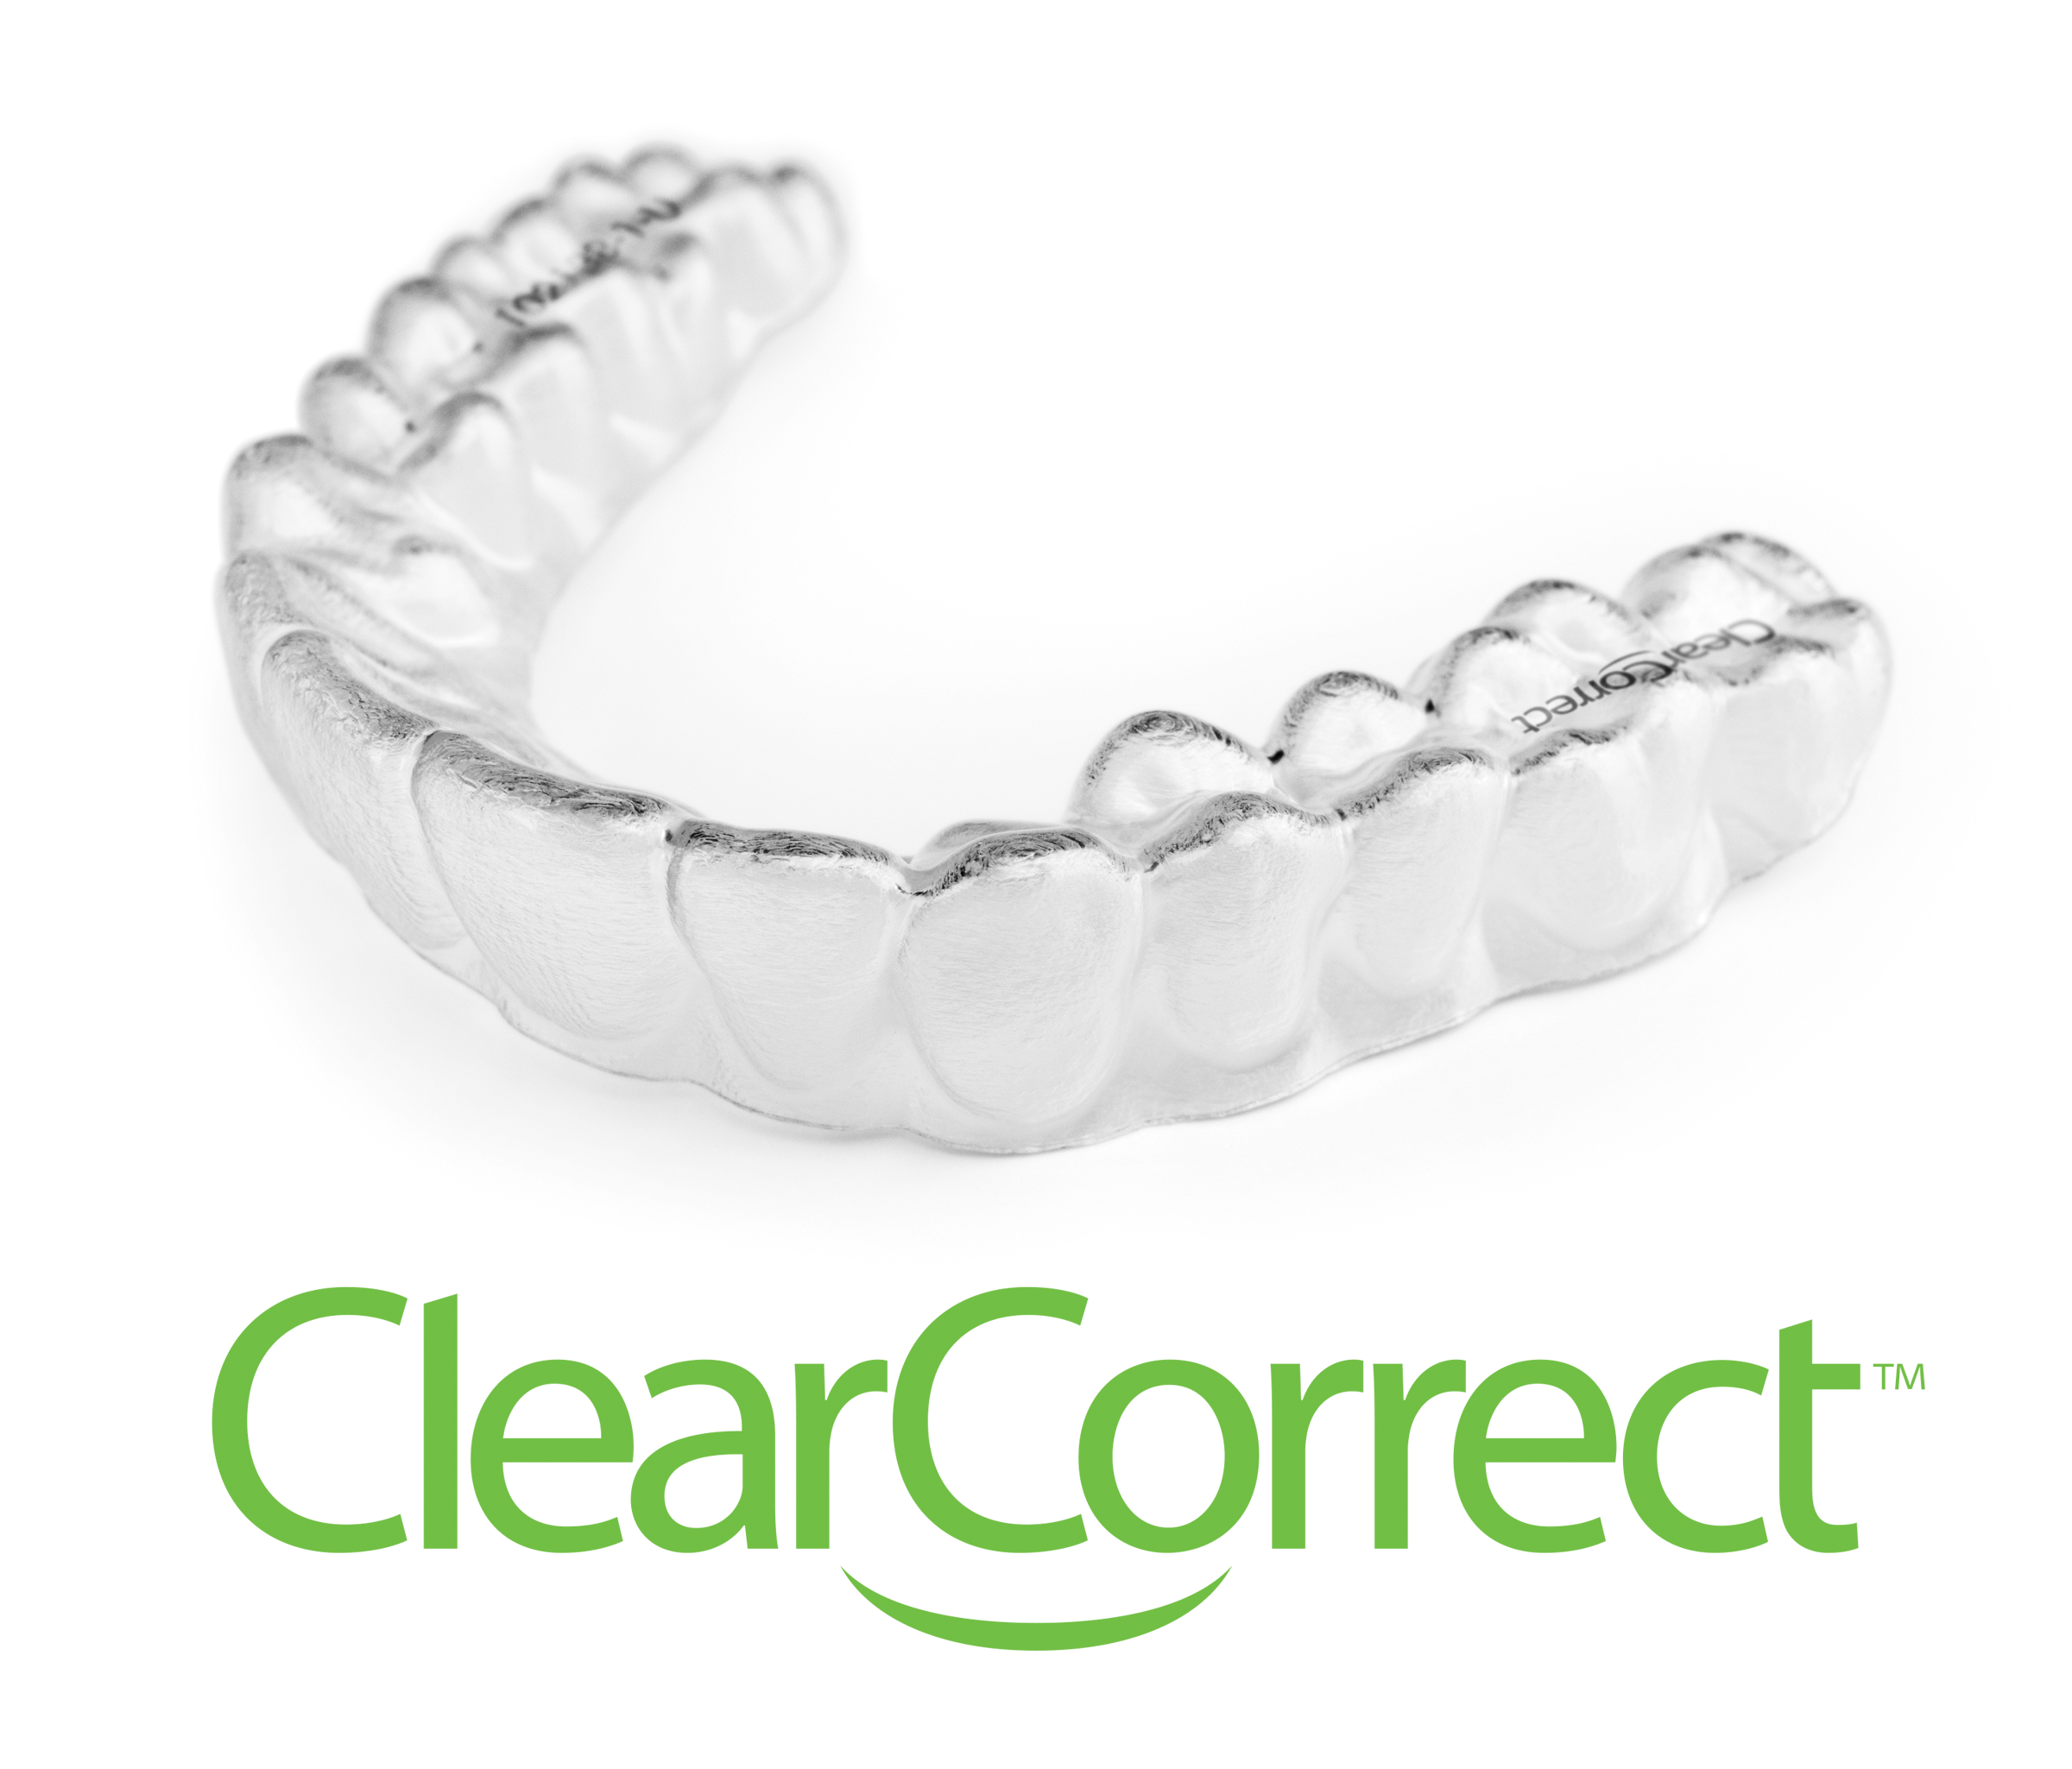 Clearcorrect provider fort mill